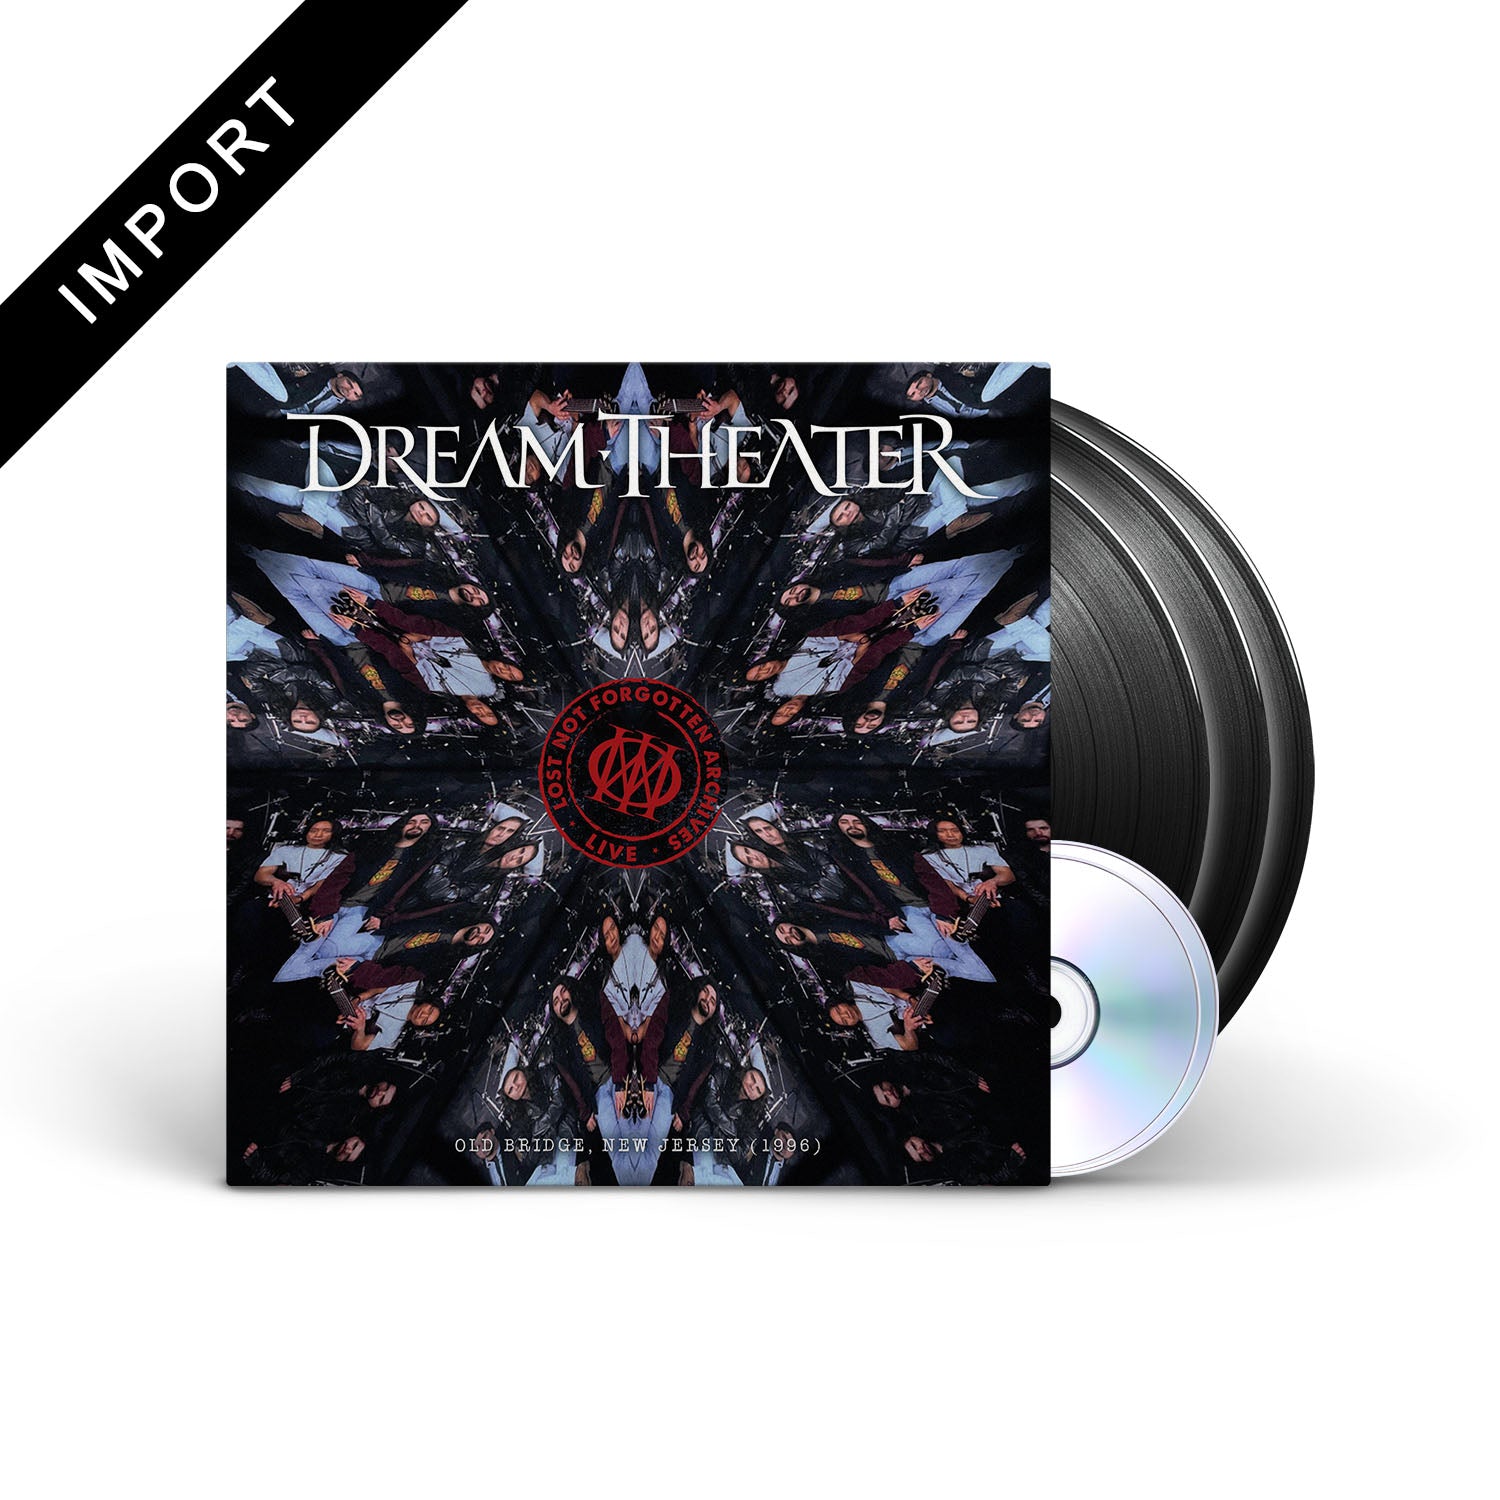 DREAM THEATER - Lost Not Forgotten Archives: Old Bridge, New Jersey (1996) - 3xLP+2CD